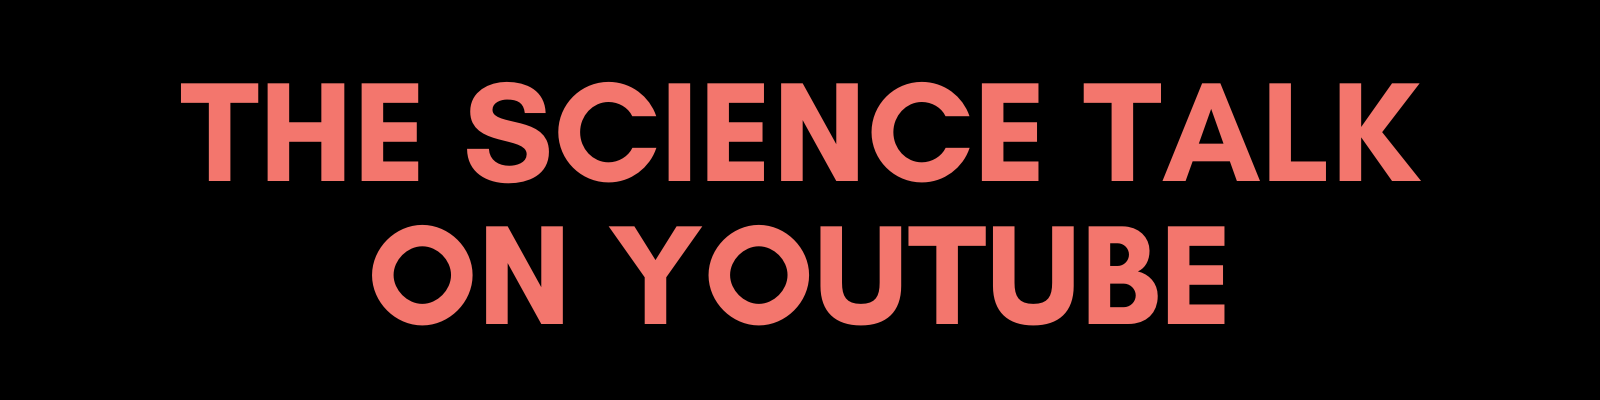 The Science Talk on YouTube